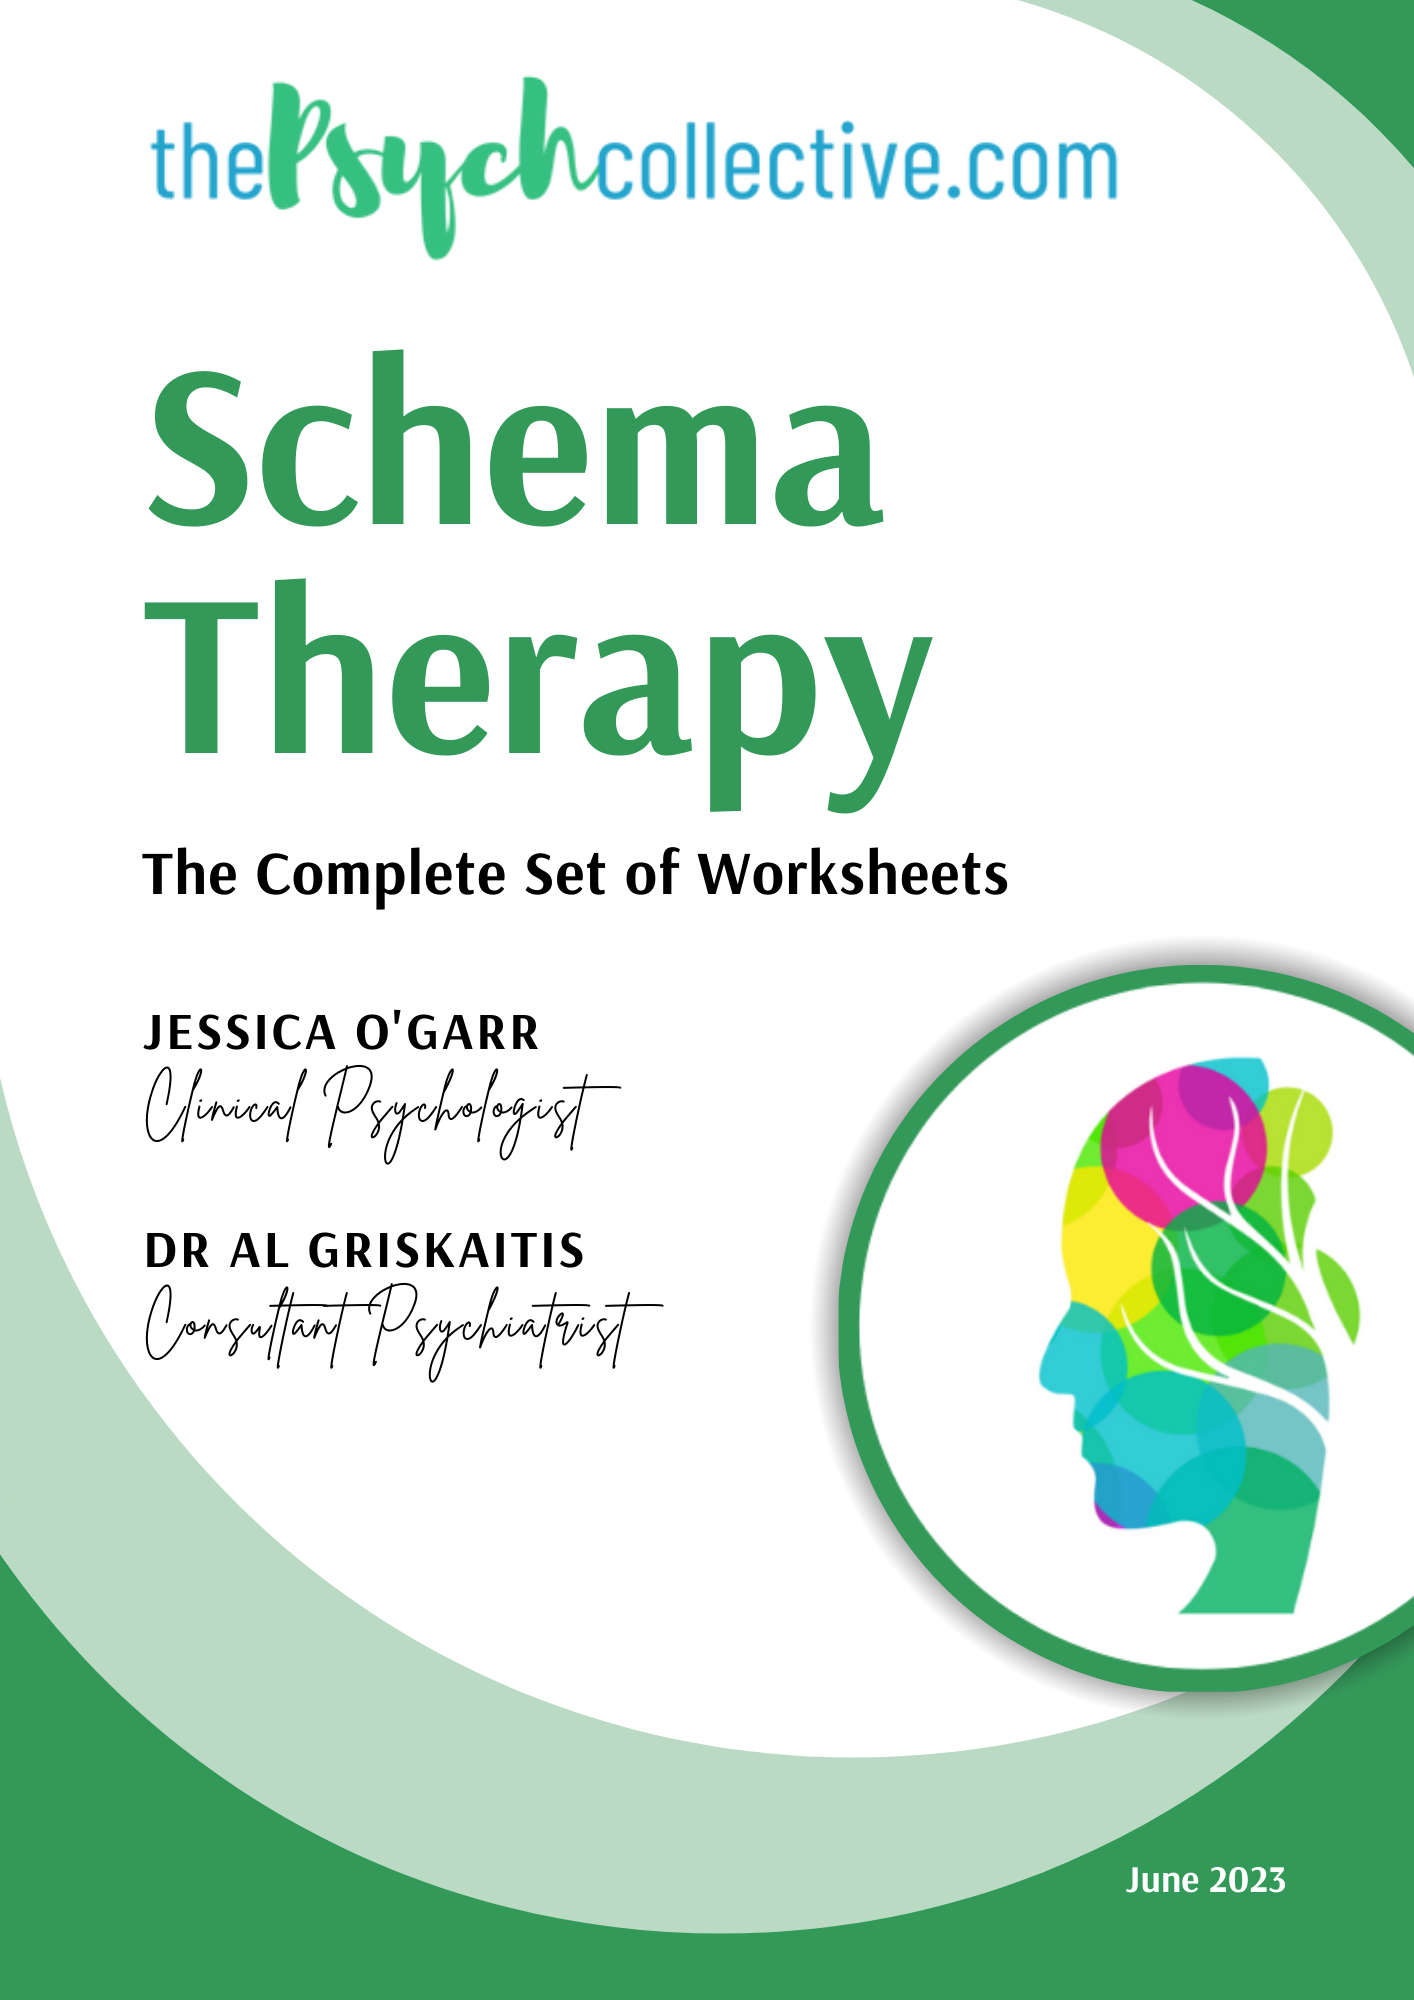 The Psych Collective's Schema Therapy worksheets